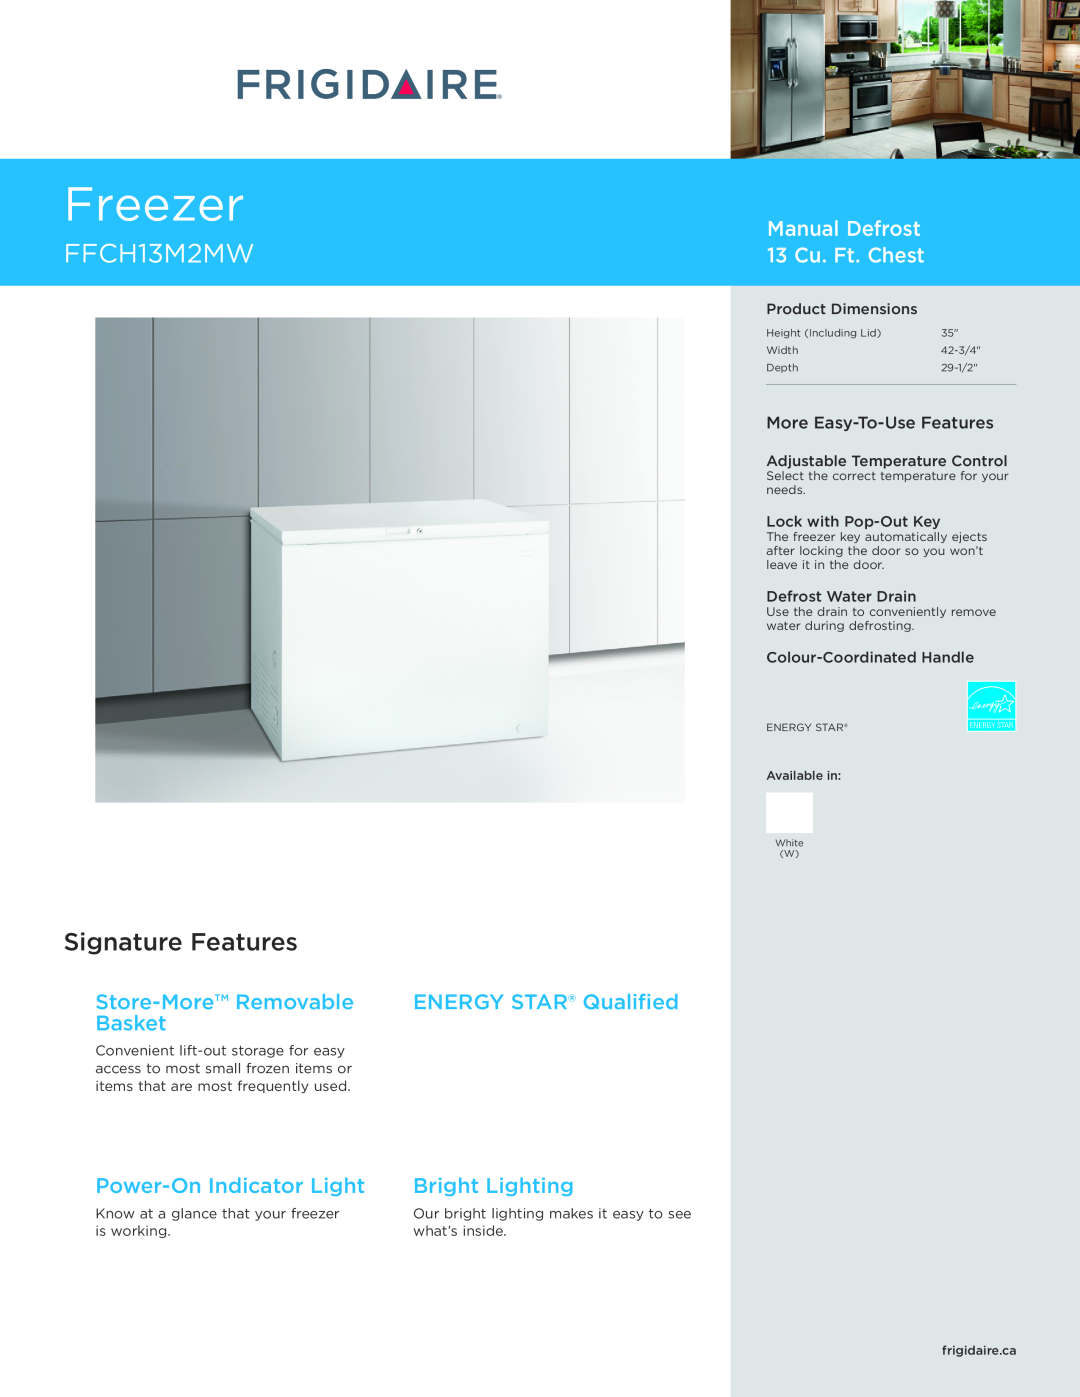 Frigidaire FFCH13M2MW dimensions Freezer, Signature Features, Store-MoreRemovable, ENERGY STAR Qualified, Basket 